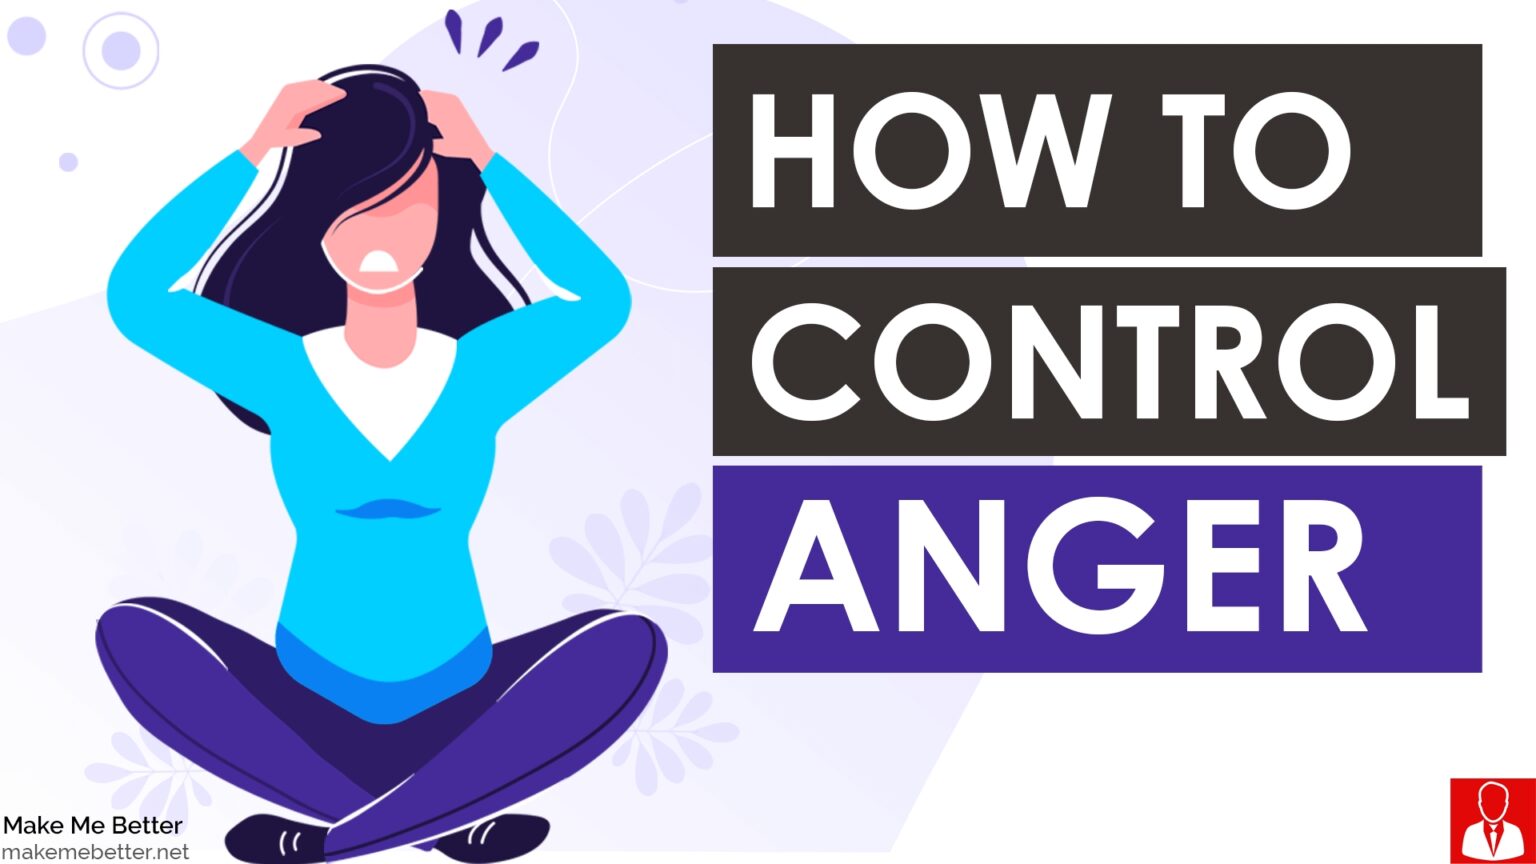 How To Control Anger 8 Easy Anger Management Tips 0849